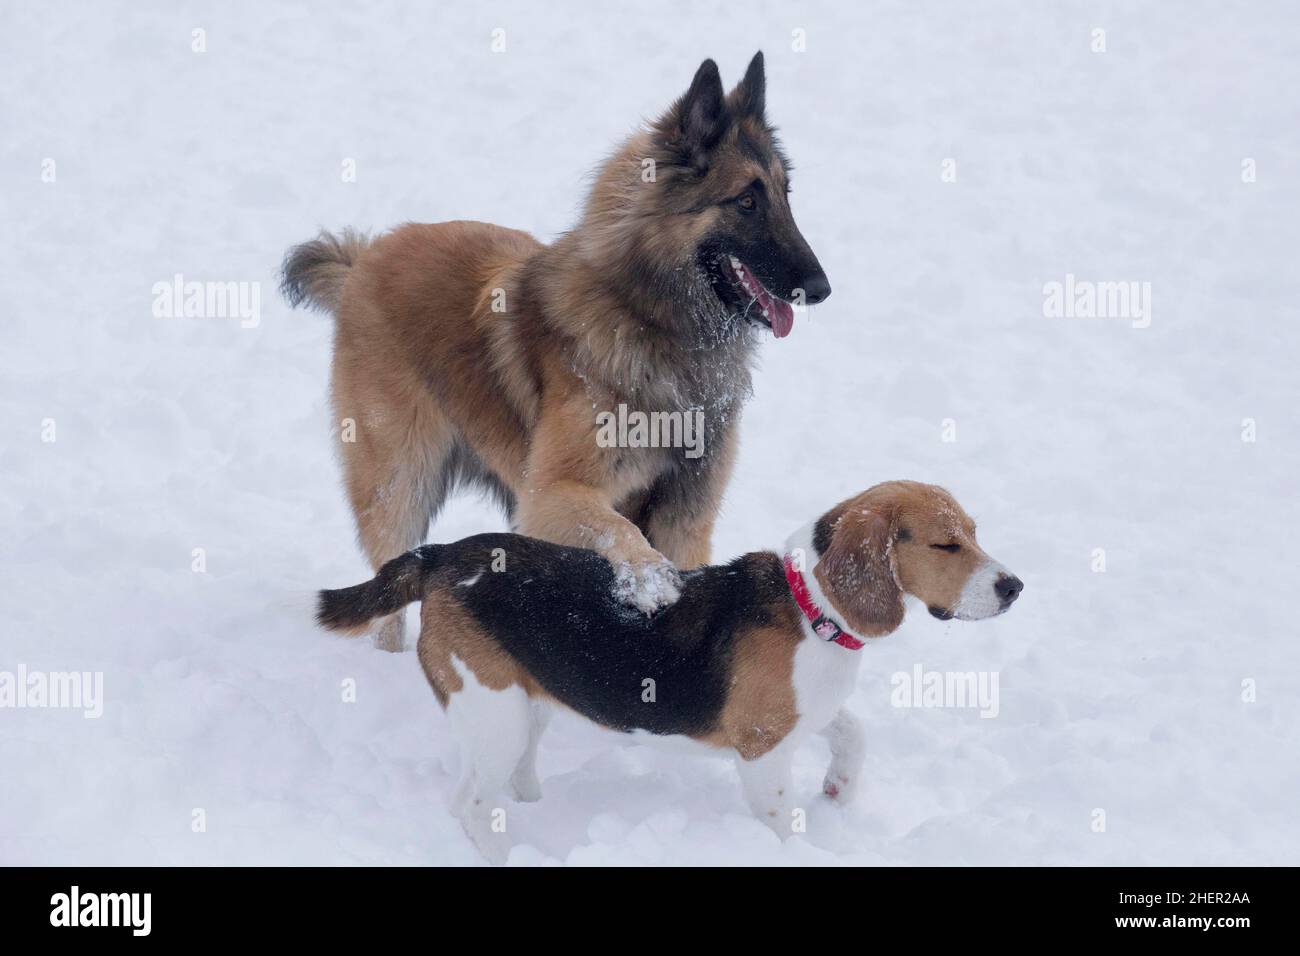 English beagle puppy and belgian sheepdog tervuren puppy are standing on a white snow in the winter park. Pet animals. Purebred dog. Stock Photo